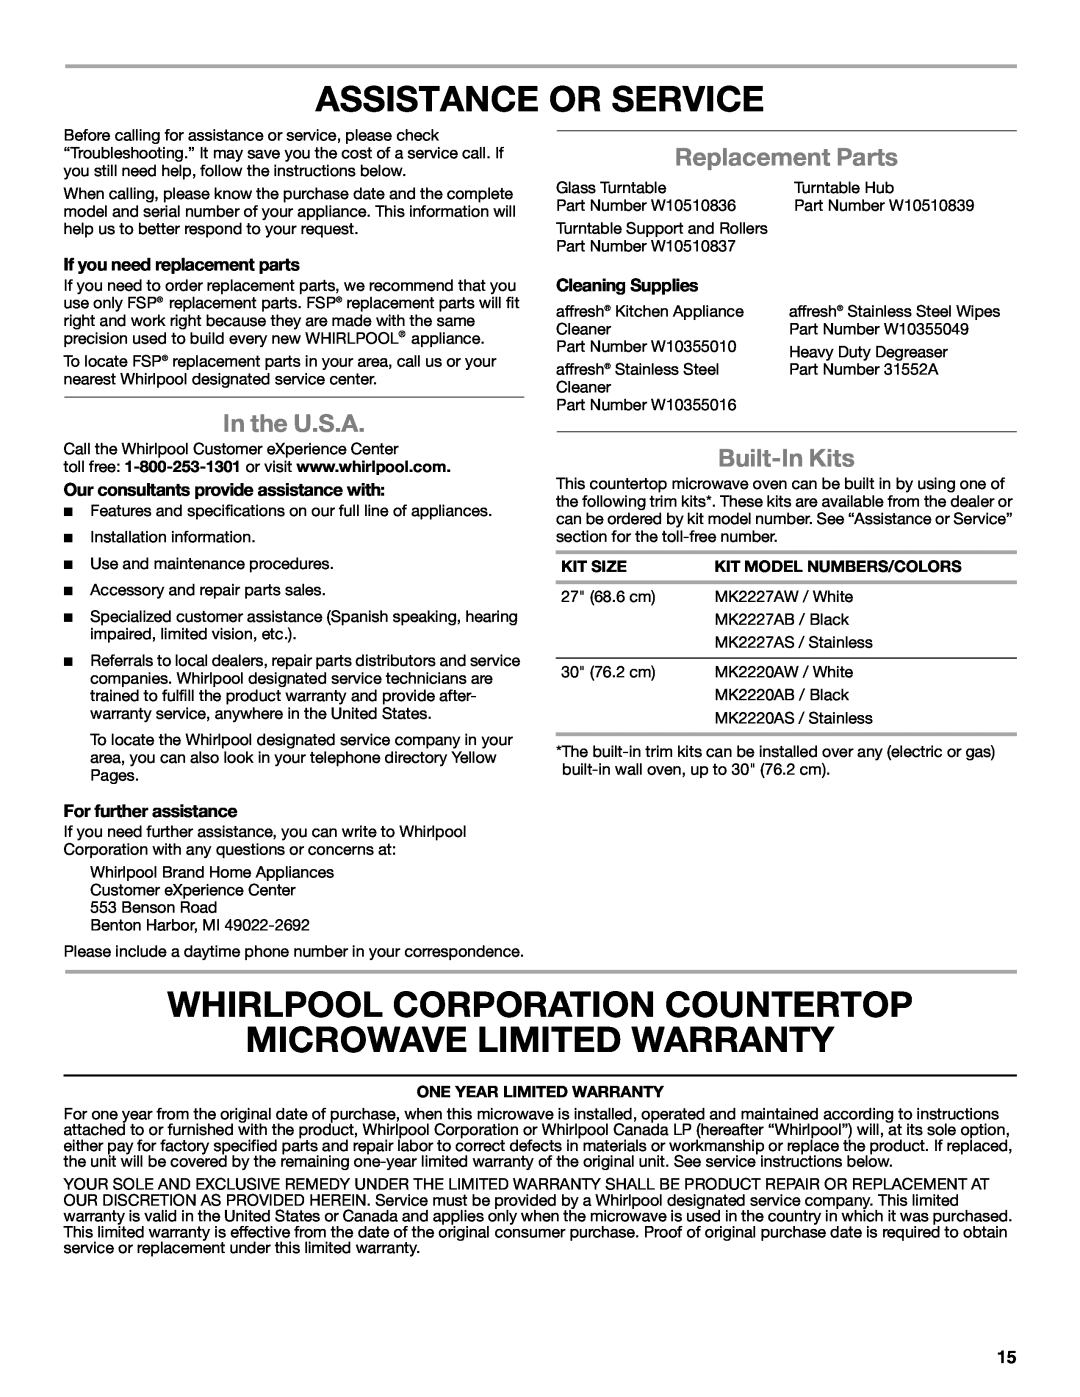 Whirlpool WMC50522 manual Assistance Or Service, Whirlpool Corporation Countertop Microwave Limited Warranty, In the U.S.A 